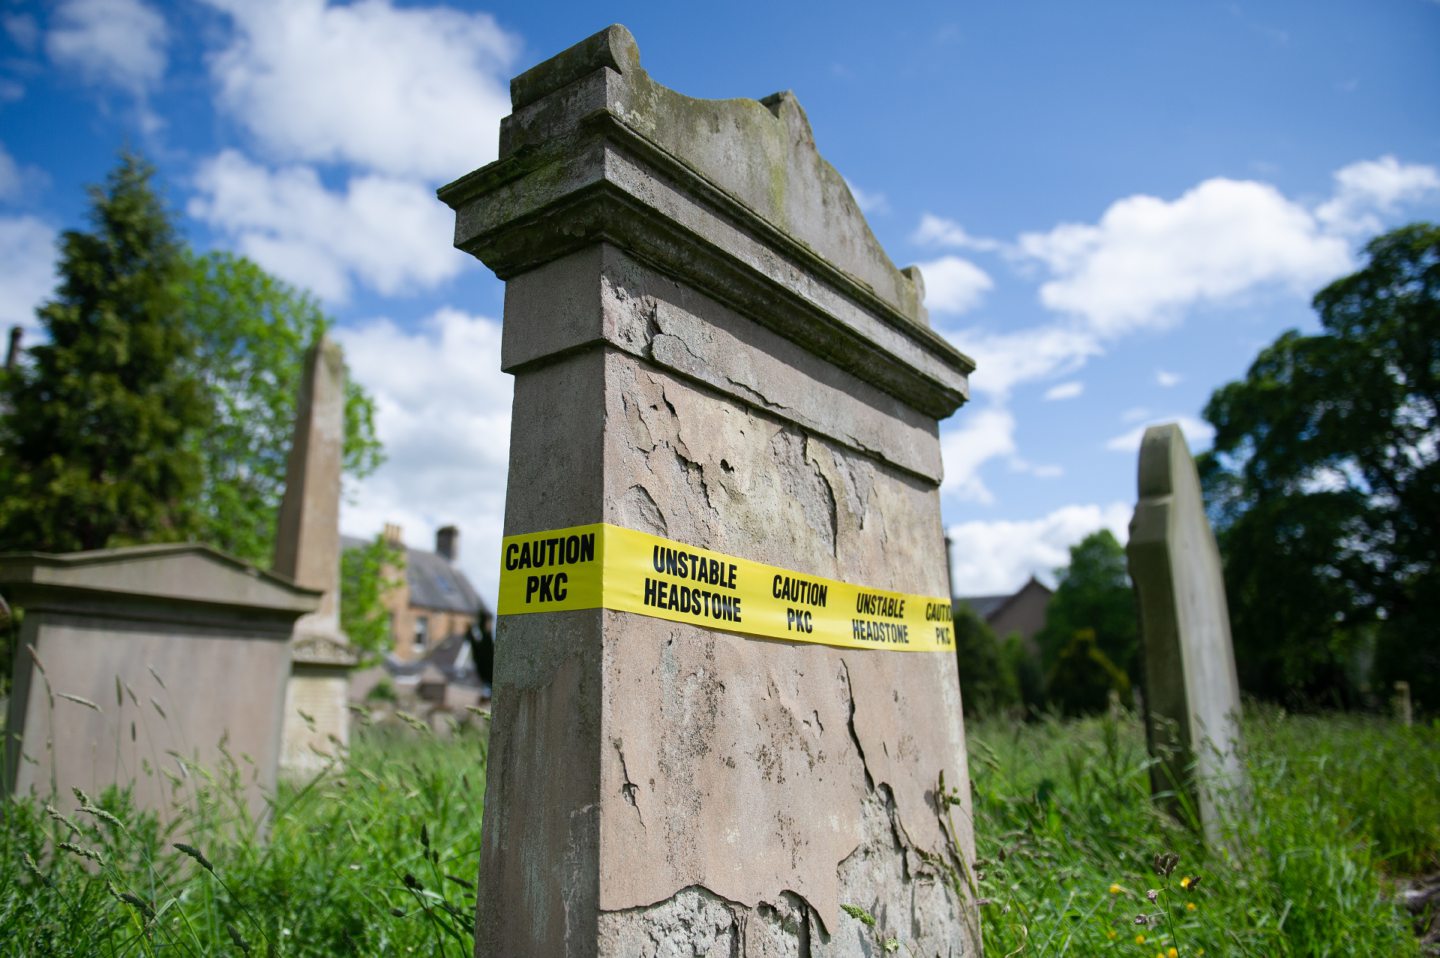 Some of the unstable headstones which are marked with safety tape at Greyfriars Burial Ground, Canal Street, Perth.